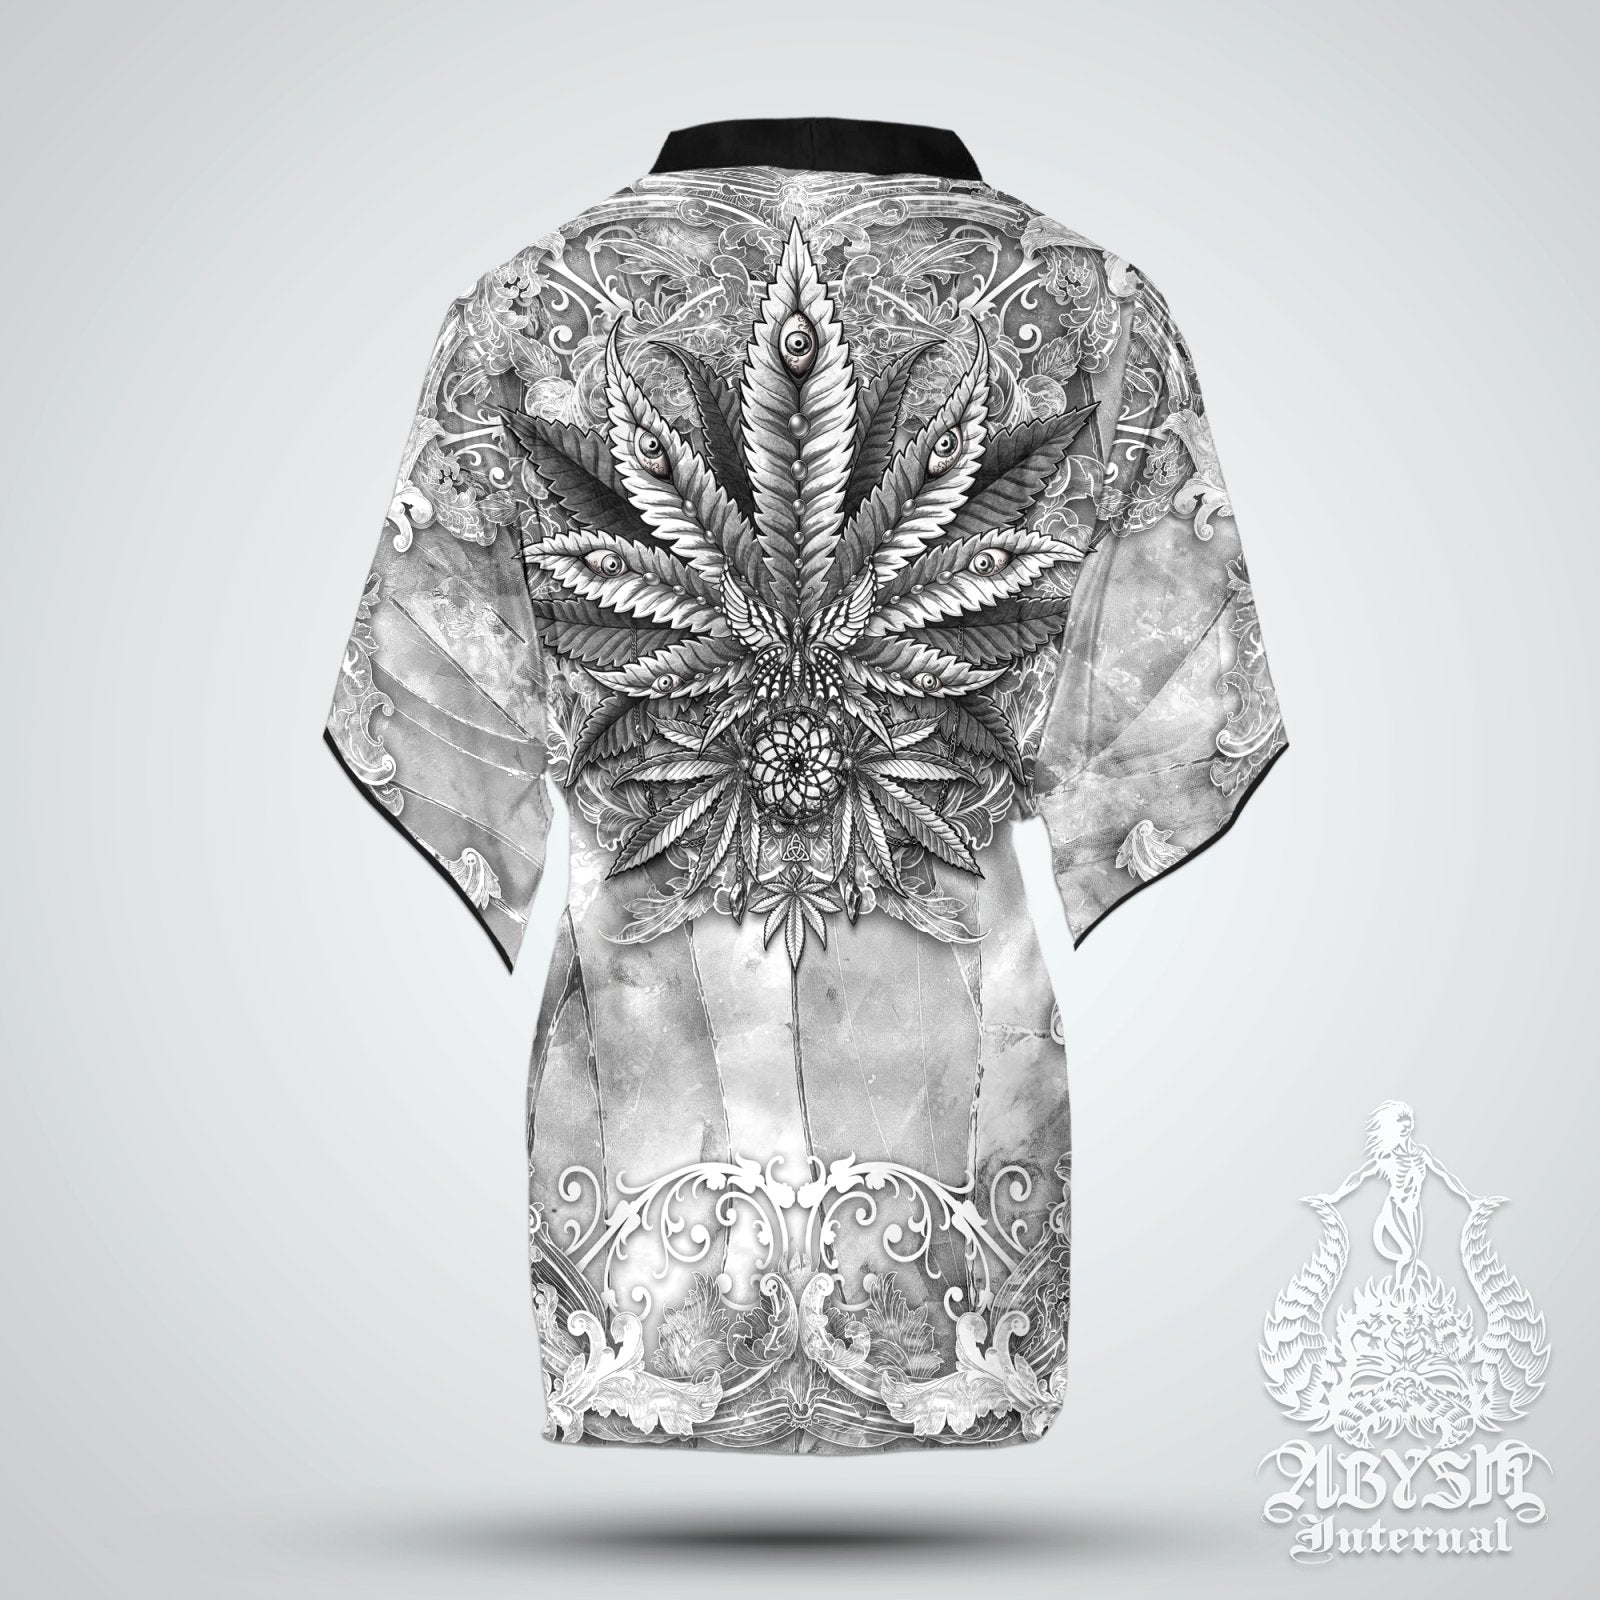 Cannabis Cover Up, Weed Outfit, Party Kimono, White Goth Summer Festival Robe, 420 Gift, Alternative Clothing, Unisex - Marijuana, Stone - Abysm Internal